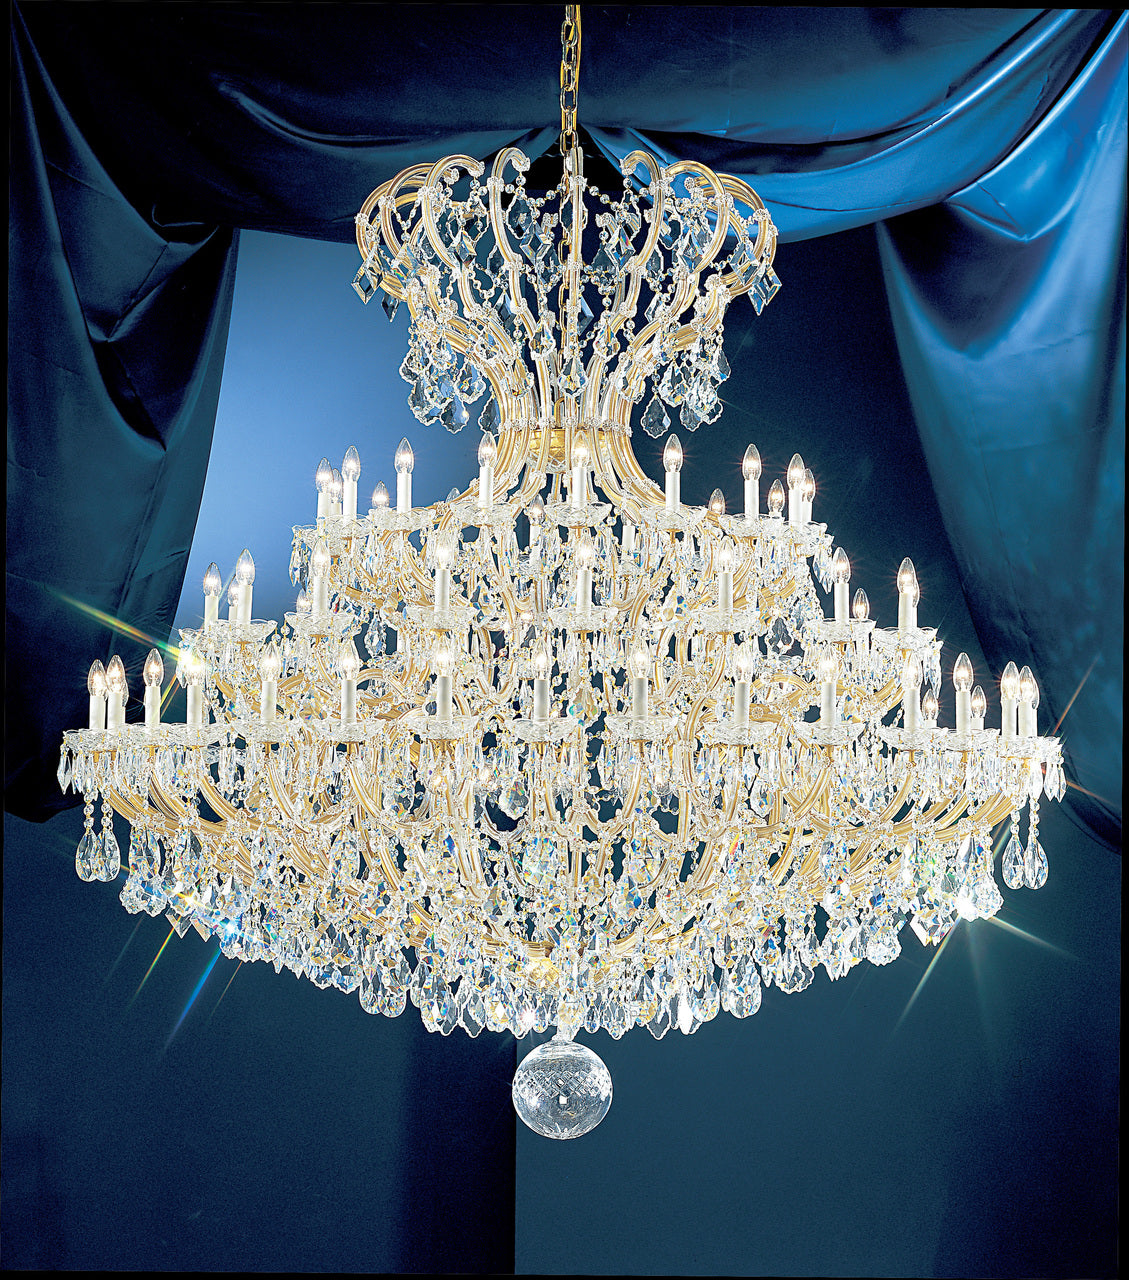 Classic Lighting 8149 OWG C Maria Theresa Traditional Crystal Chandelier in Olde World Gold (Imported from Italy)